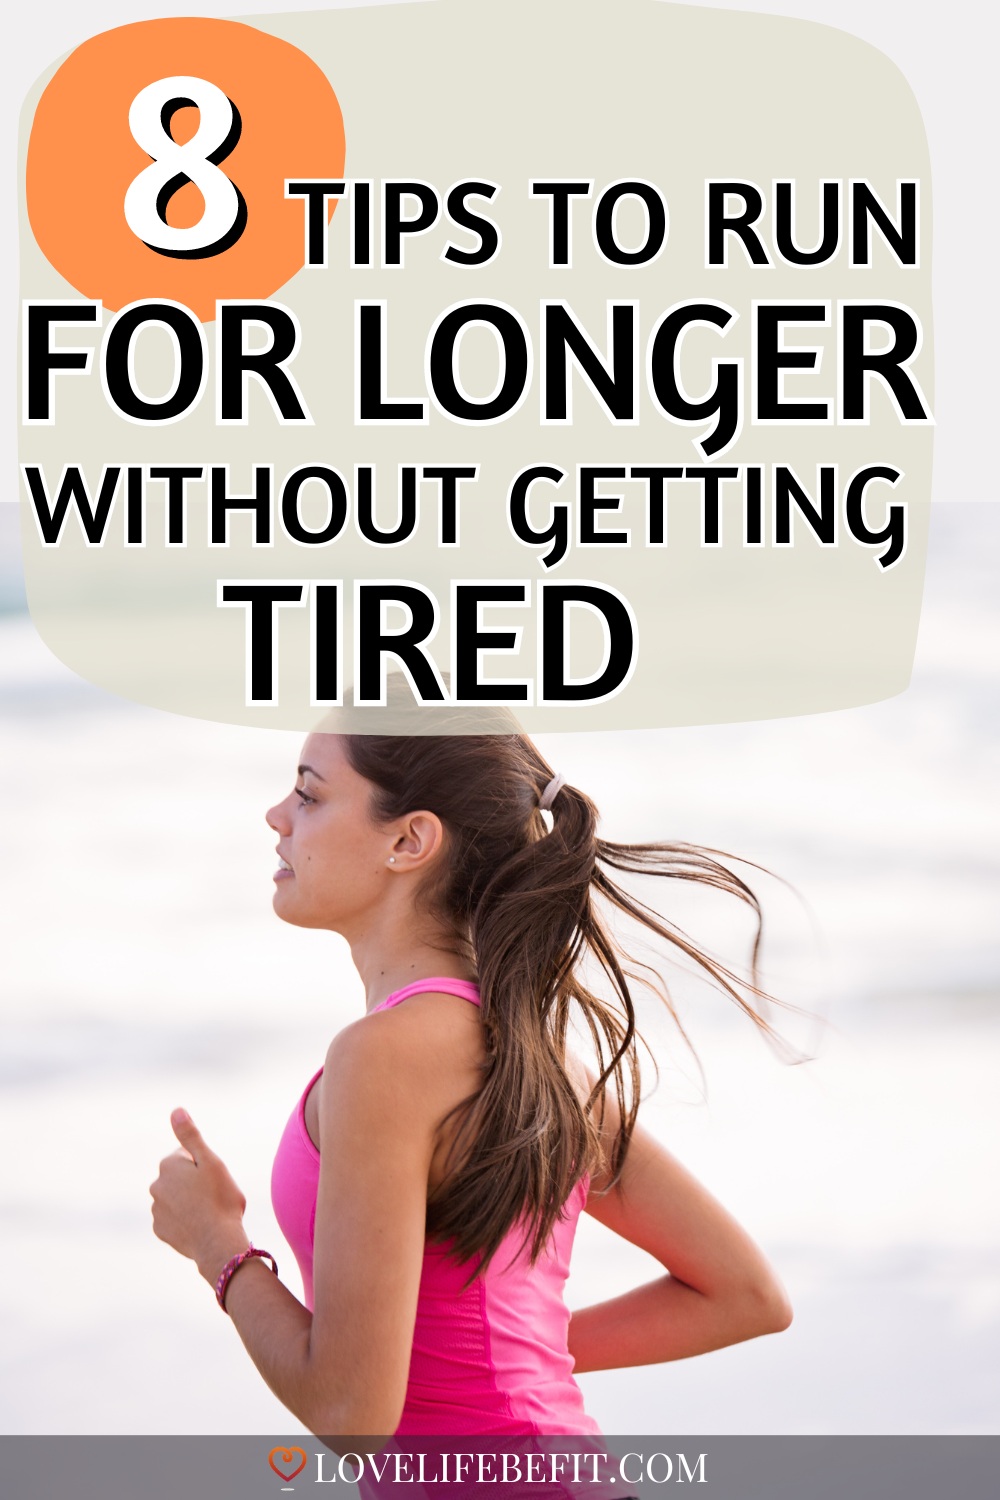 8 Tips To Run For Longer With out Getting Tired